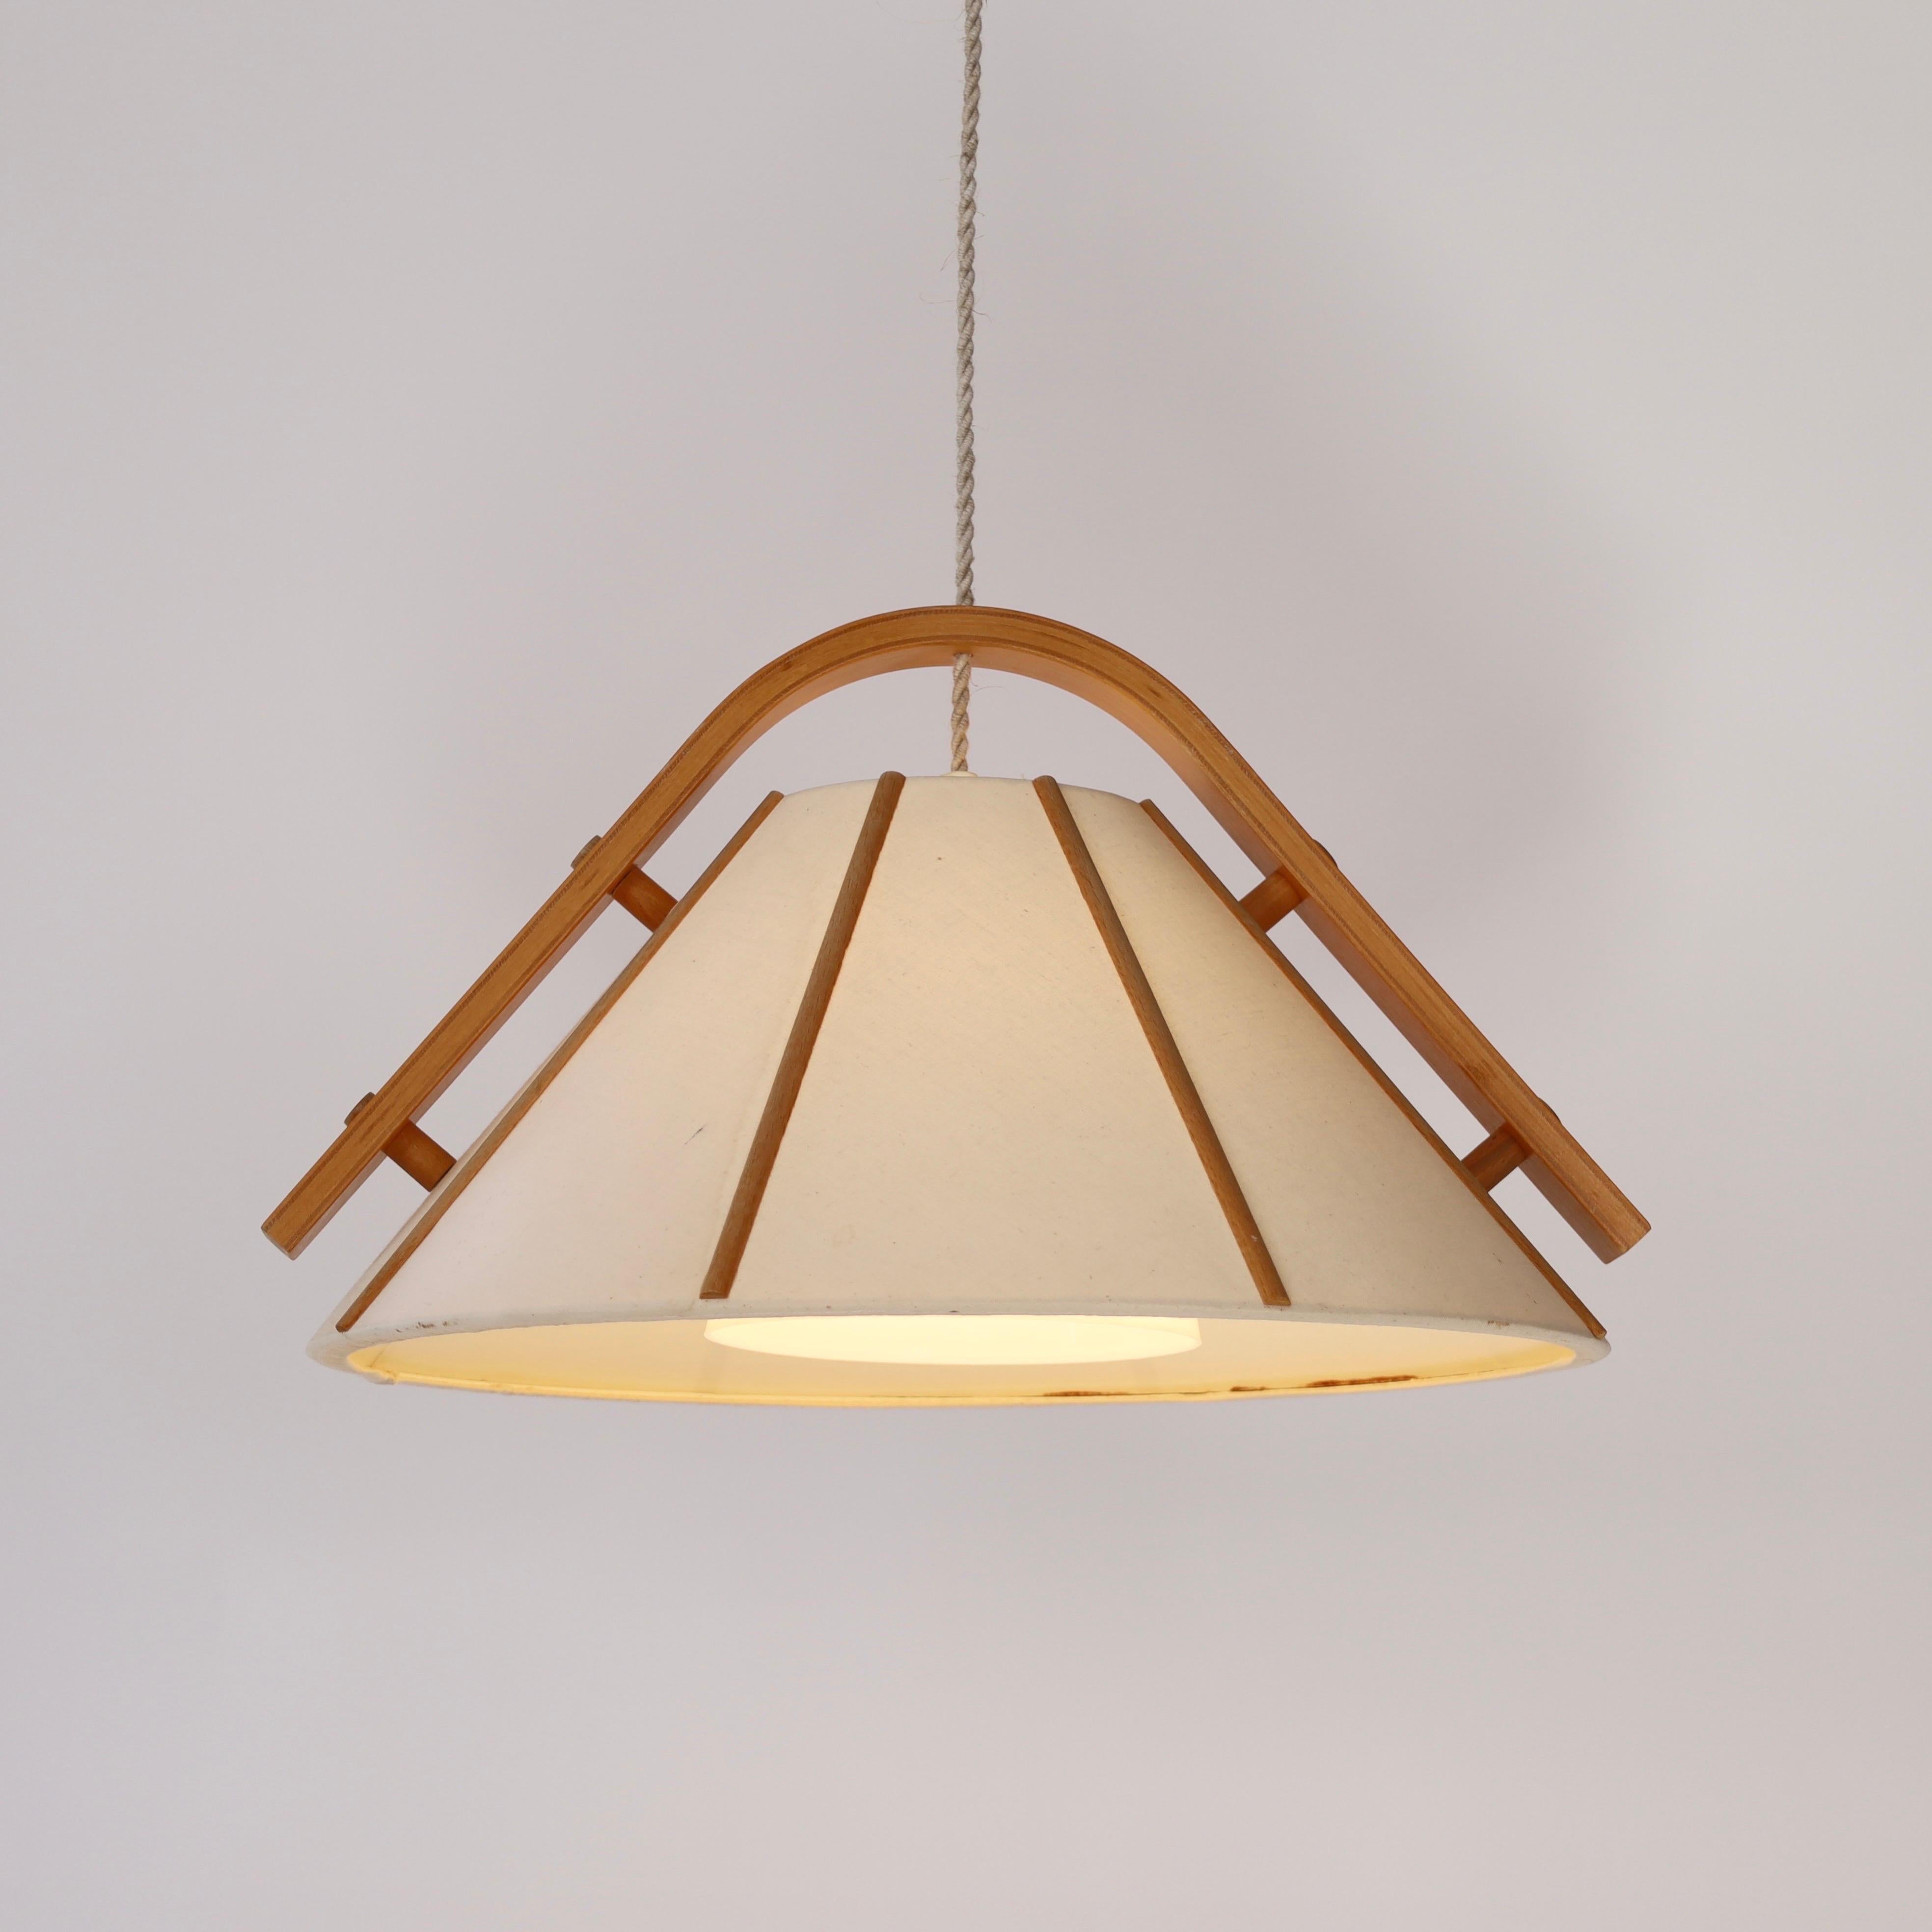 A pendant light in bend Beech wood with a Canvas shade designed by Jan Wickelgren in the 1970s for Aneta Sweden. A scandinavian light to a beautiful space. 

* A pendant light in bend beech veneer and beige canvas
* Designer: Jan Wickelgren
*